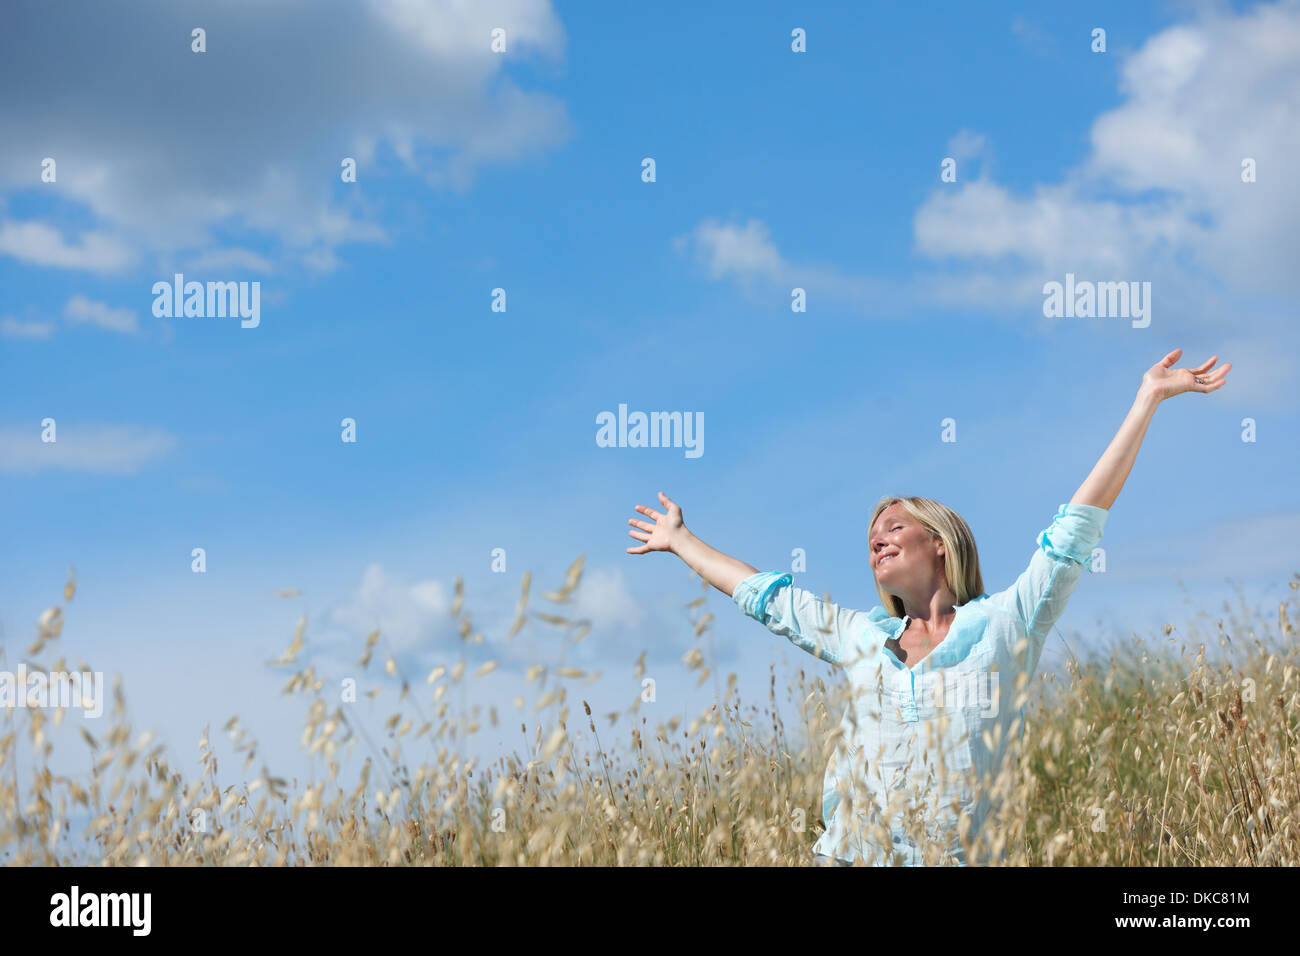 Woman standing in corn field with arms raised Stock Photo